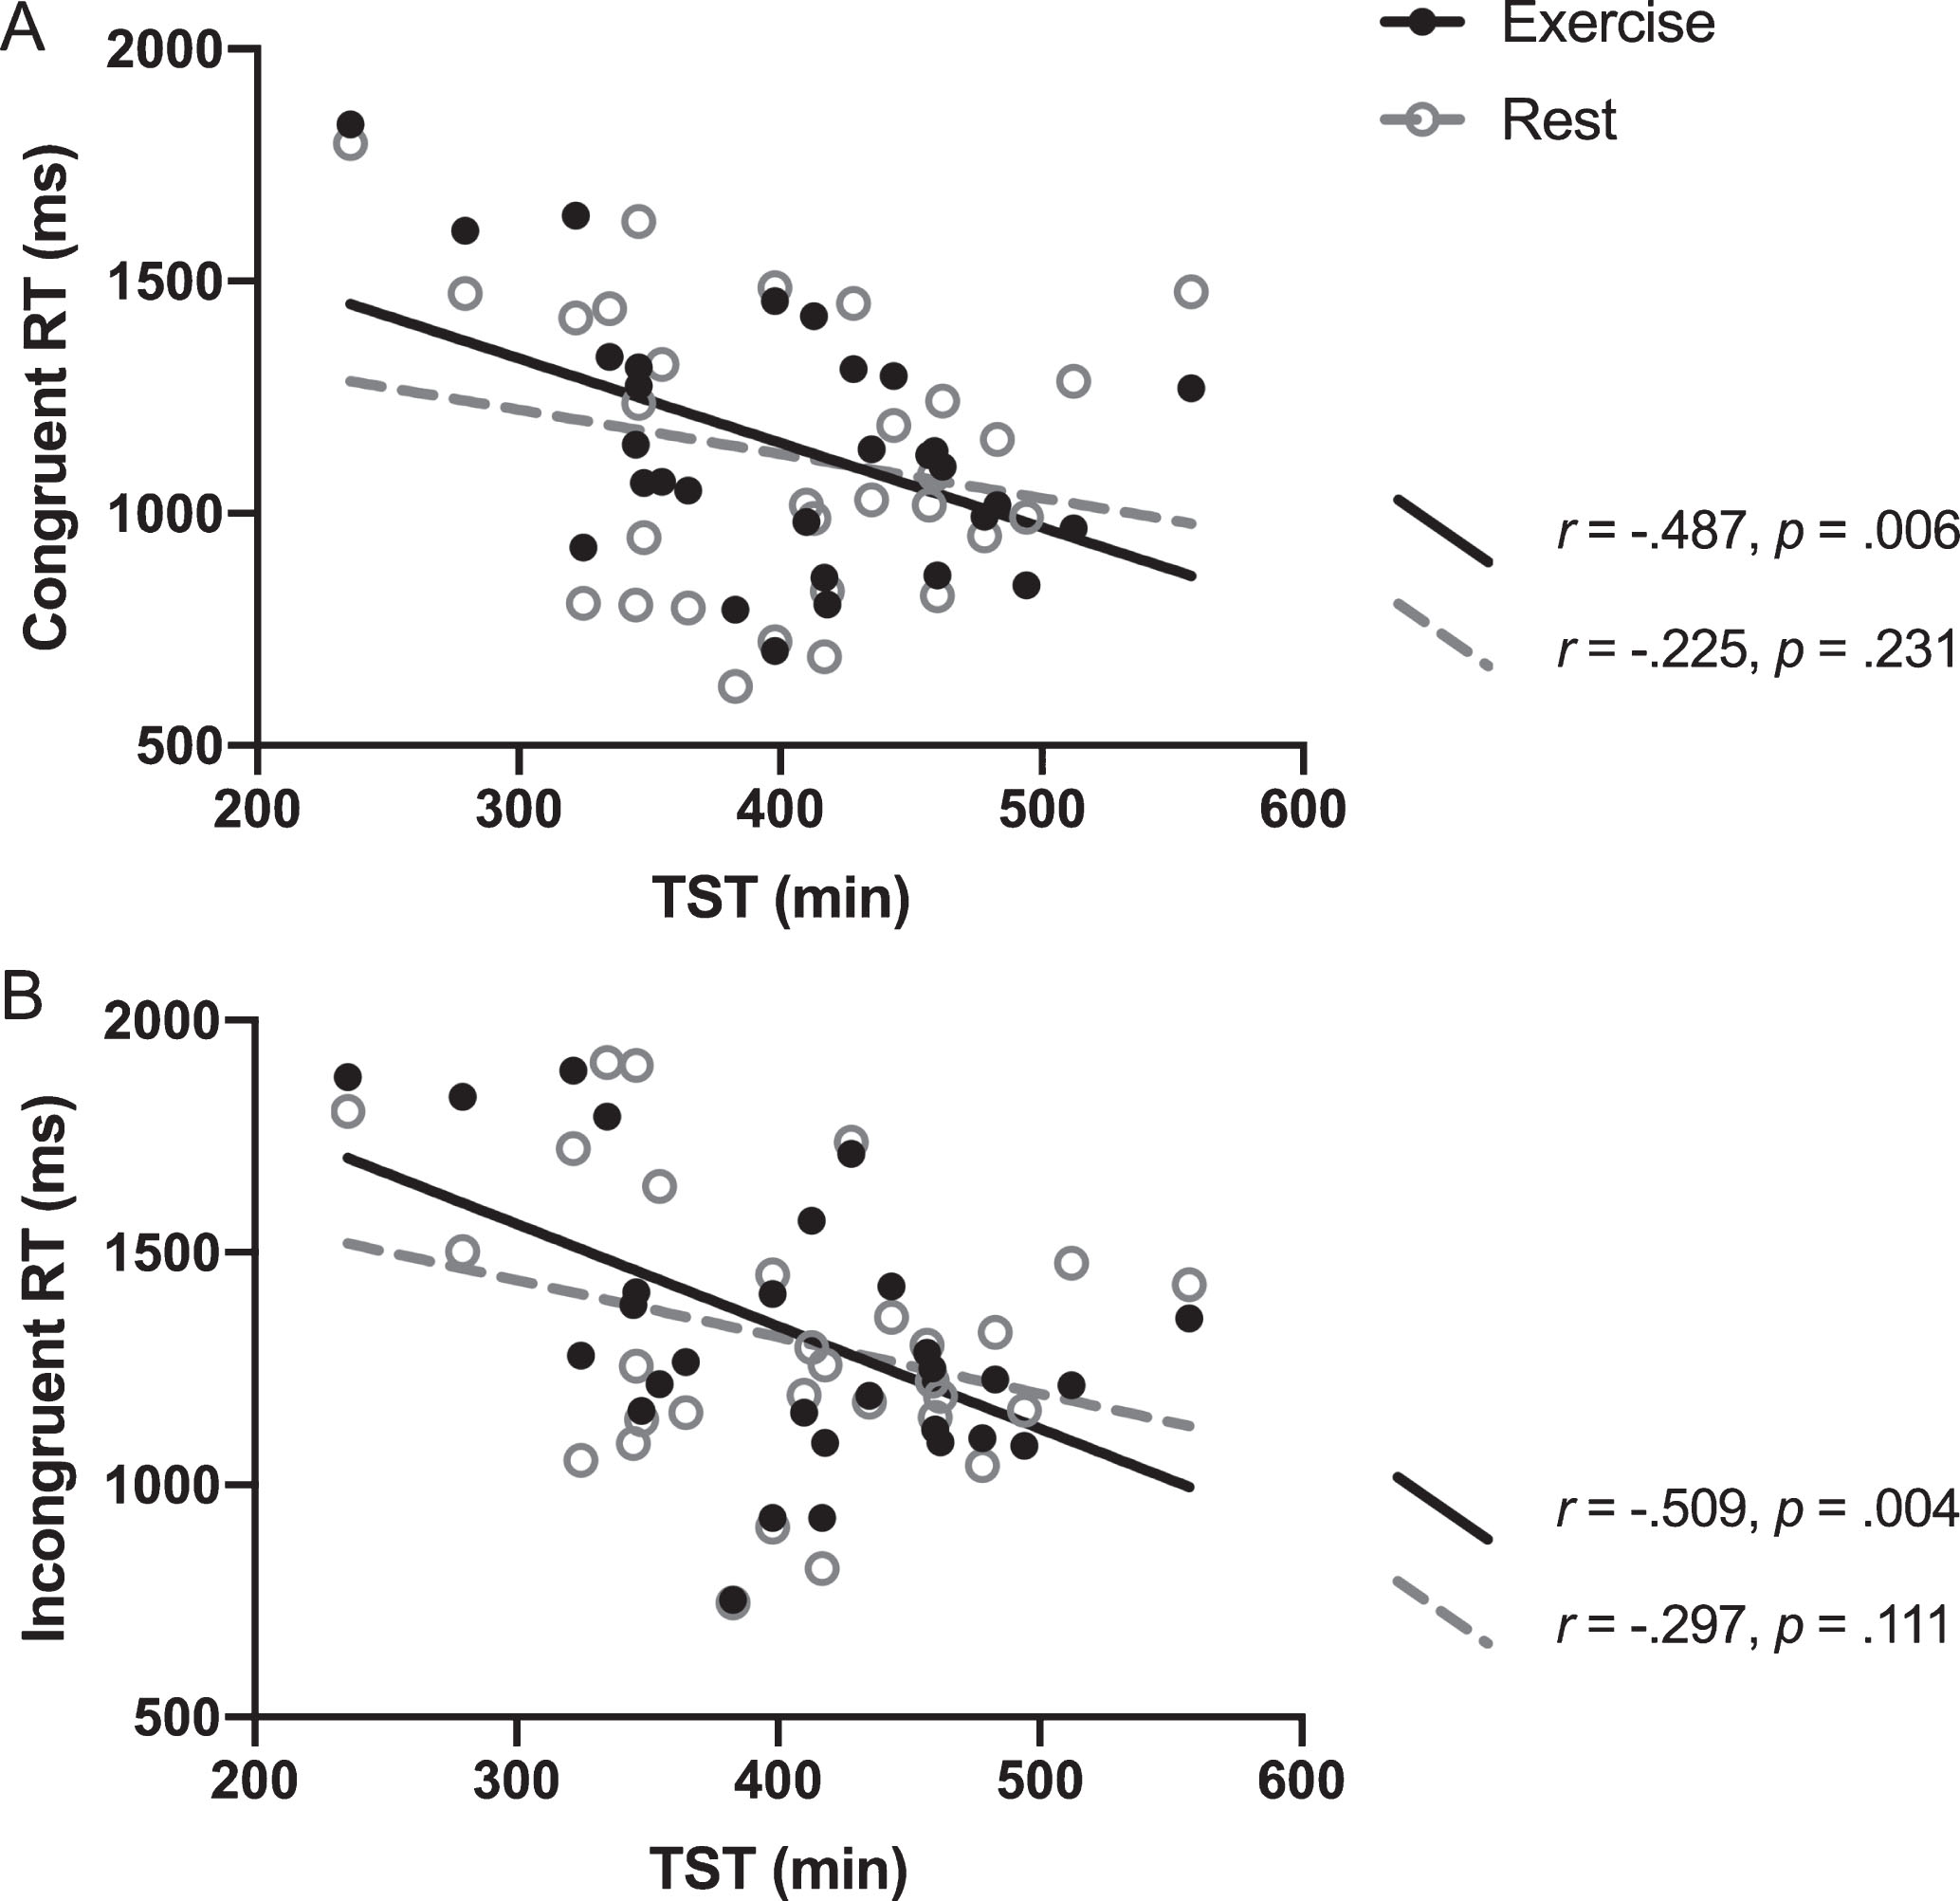 The correaltion between TST and the Stroop RT for exercise and rest conditions. Pearson’s correlation r and p-values indicate correaltion of TST and Stroop RT for each condition. Interactions were significant for both (A) and (B), with p-values of 0.029 and 0.022, respectively.